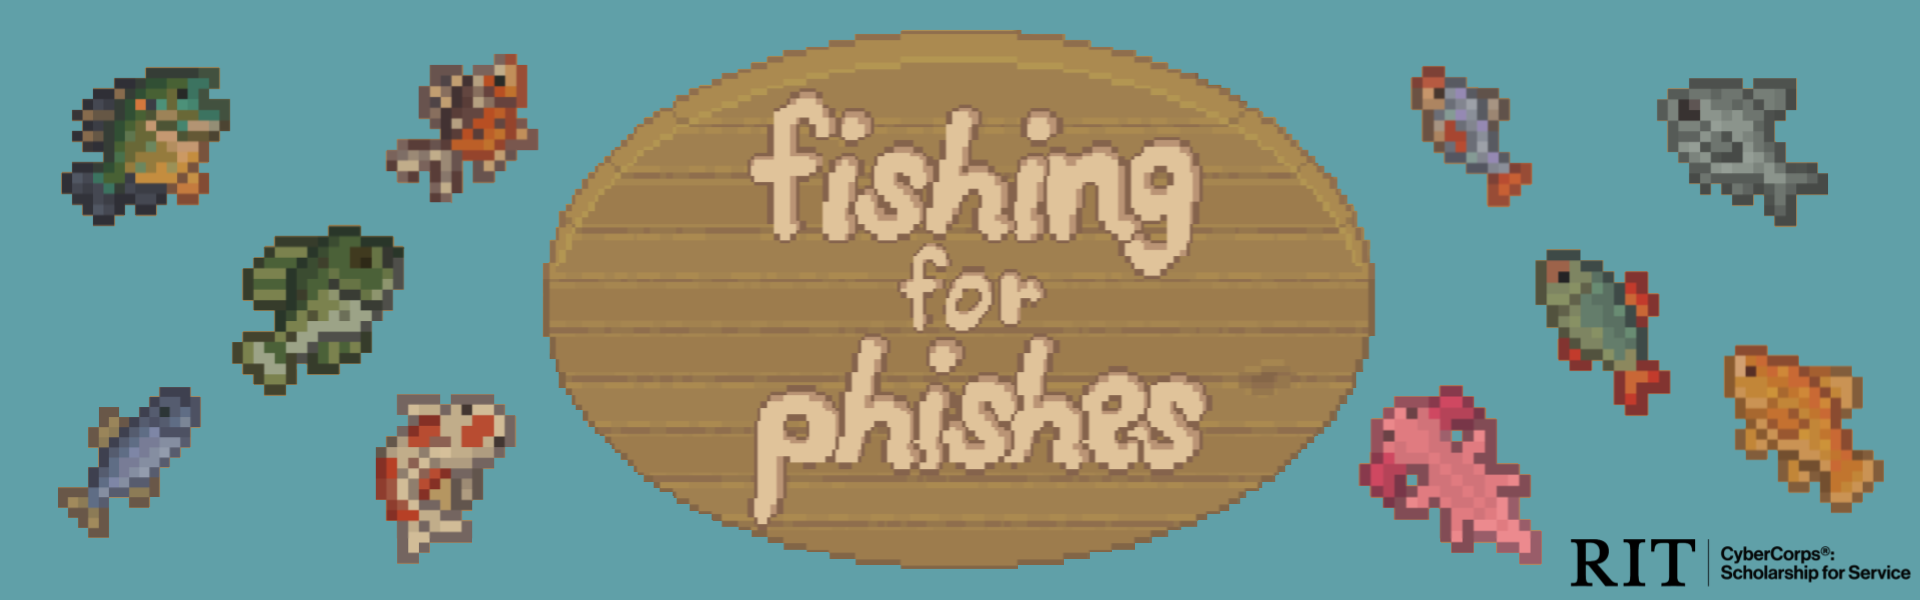 Fishing for Phishes : A K-12 Cybersecurity Education Game